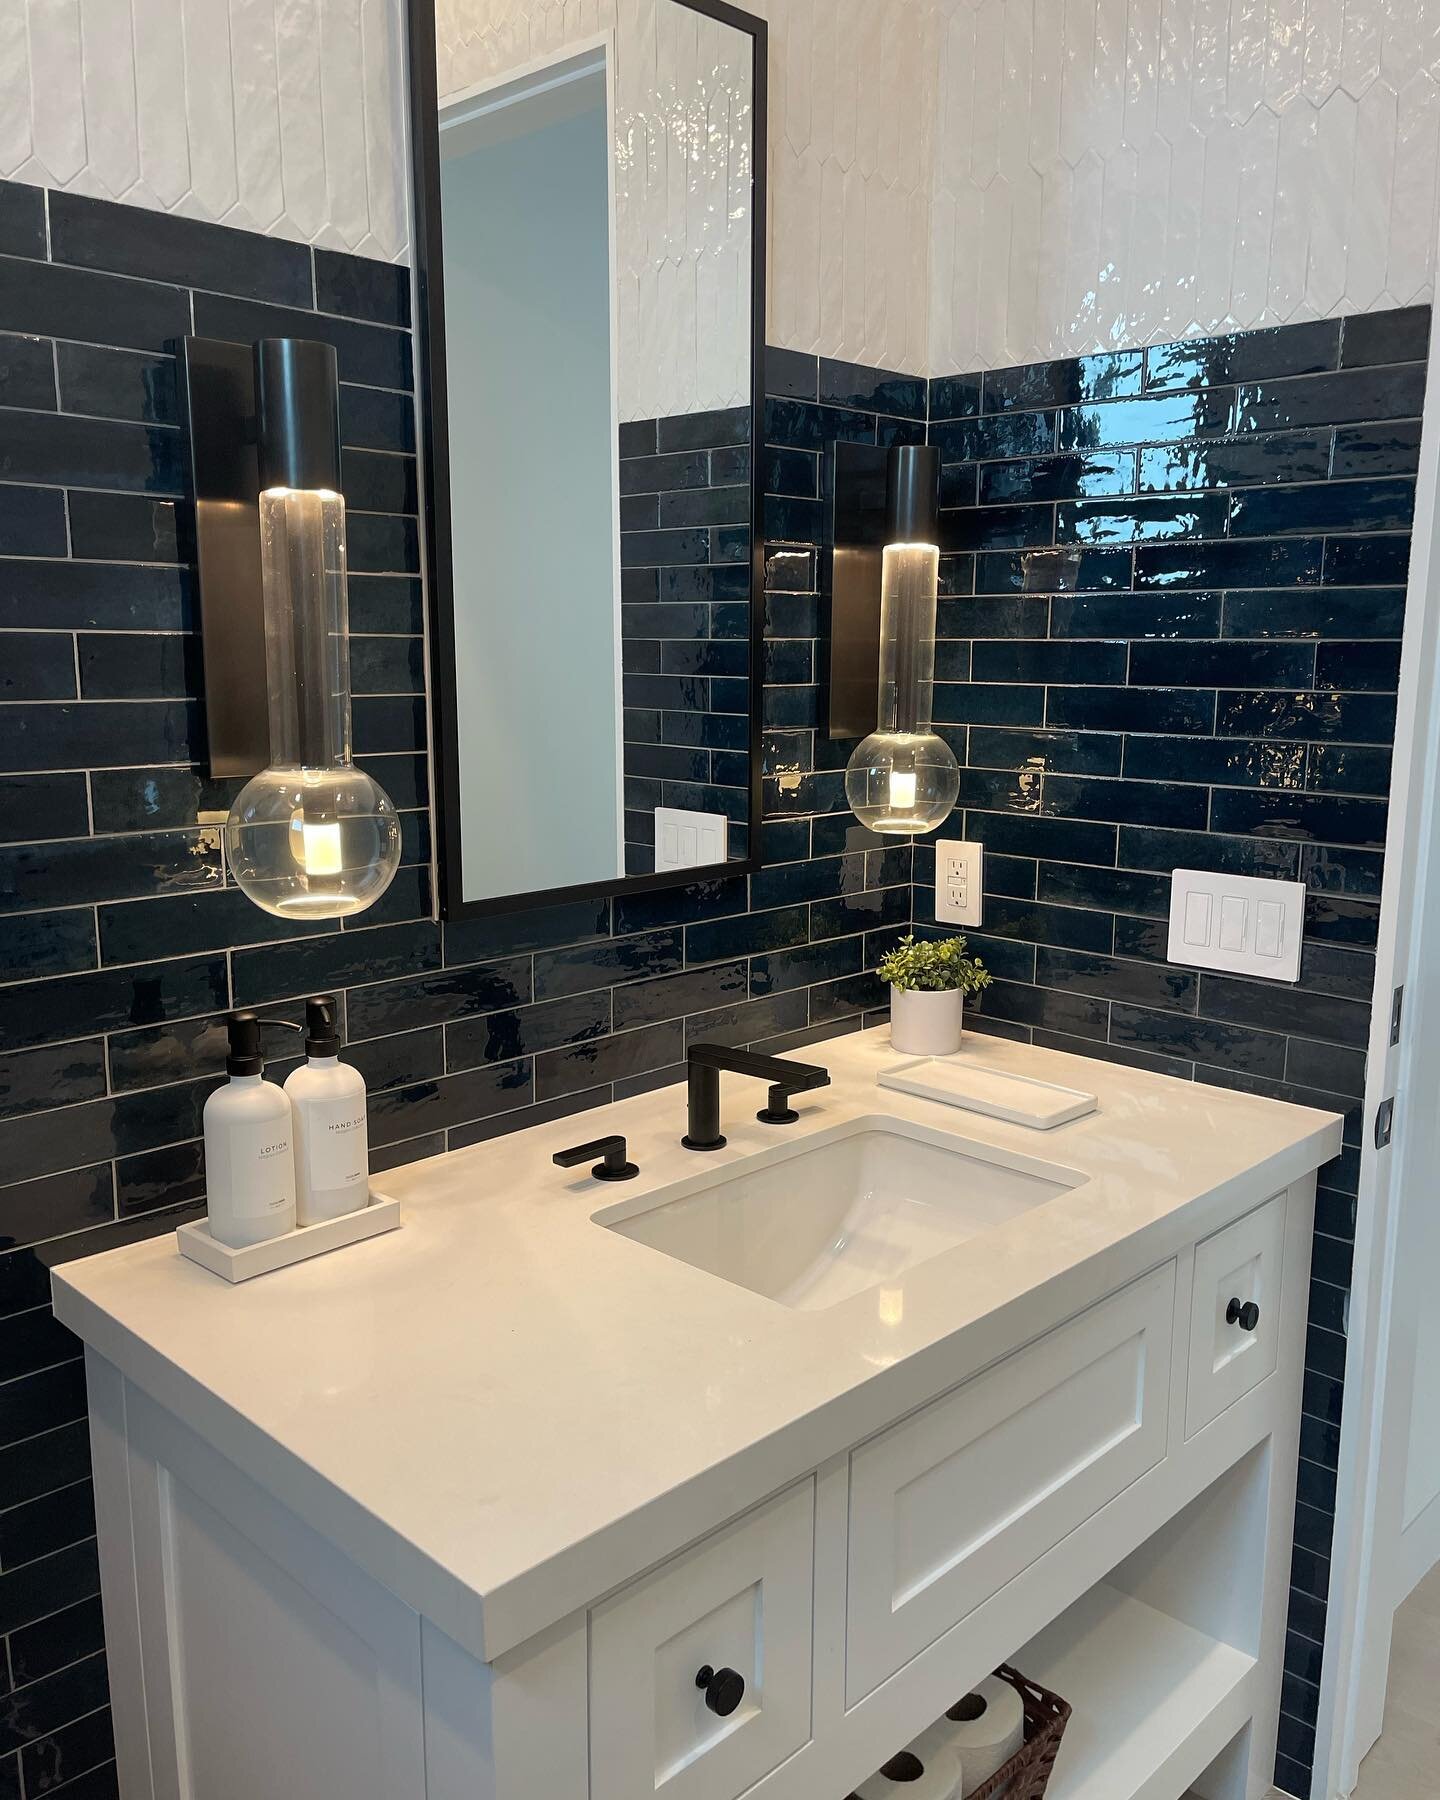 Happy Friday!!🫶🏼 
&amp; do you see that picket to subway transition? 👀 
So cool and different 😍

#bathroomdesign #tiledesign #tilestyle #tileinstallation #tilework #tilelove #tilelife #itsallinthedetails #hermosabeach #redondobeach #elsegundo #pa